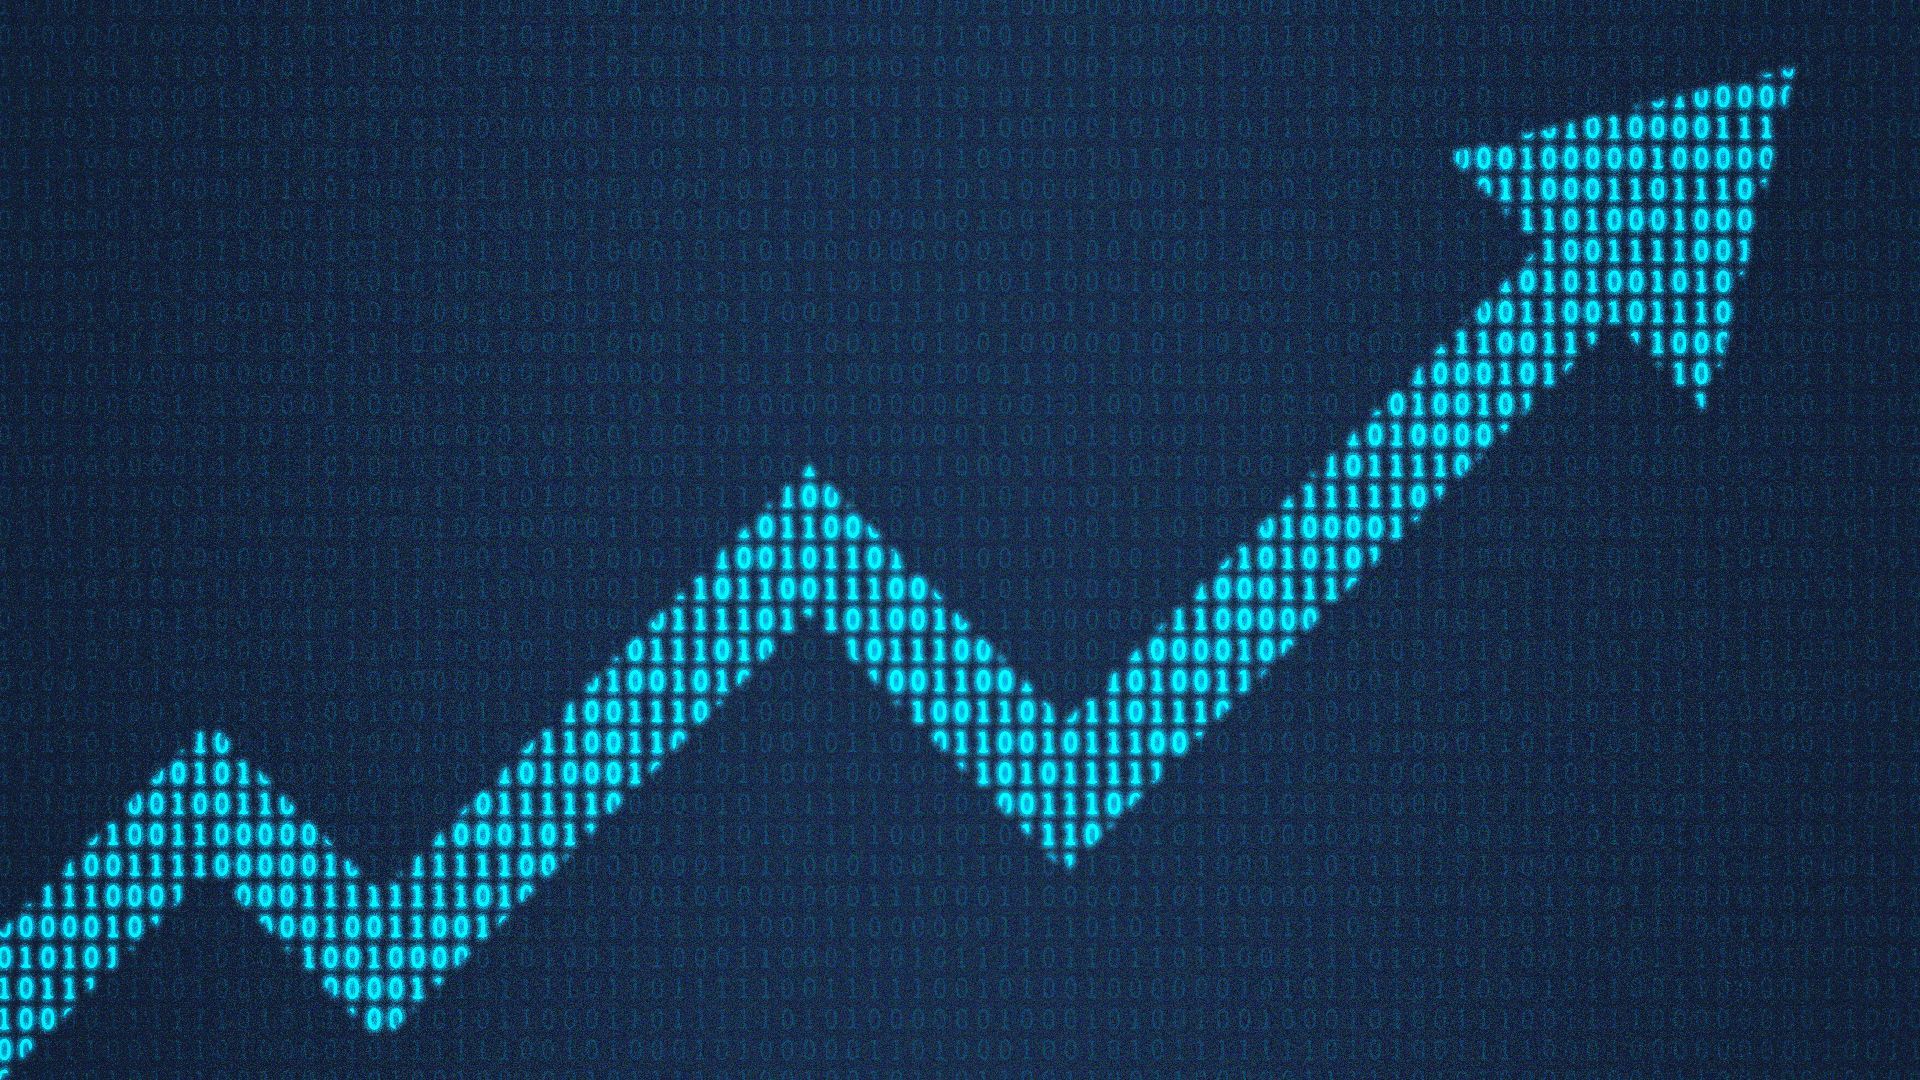 an illustration of an upward climbing arrow created out of glowing binary code